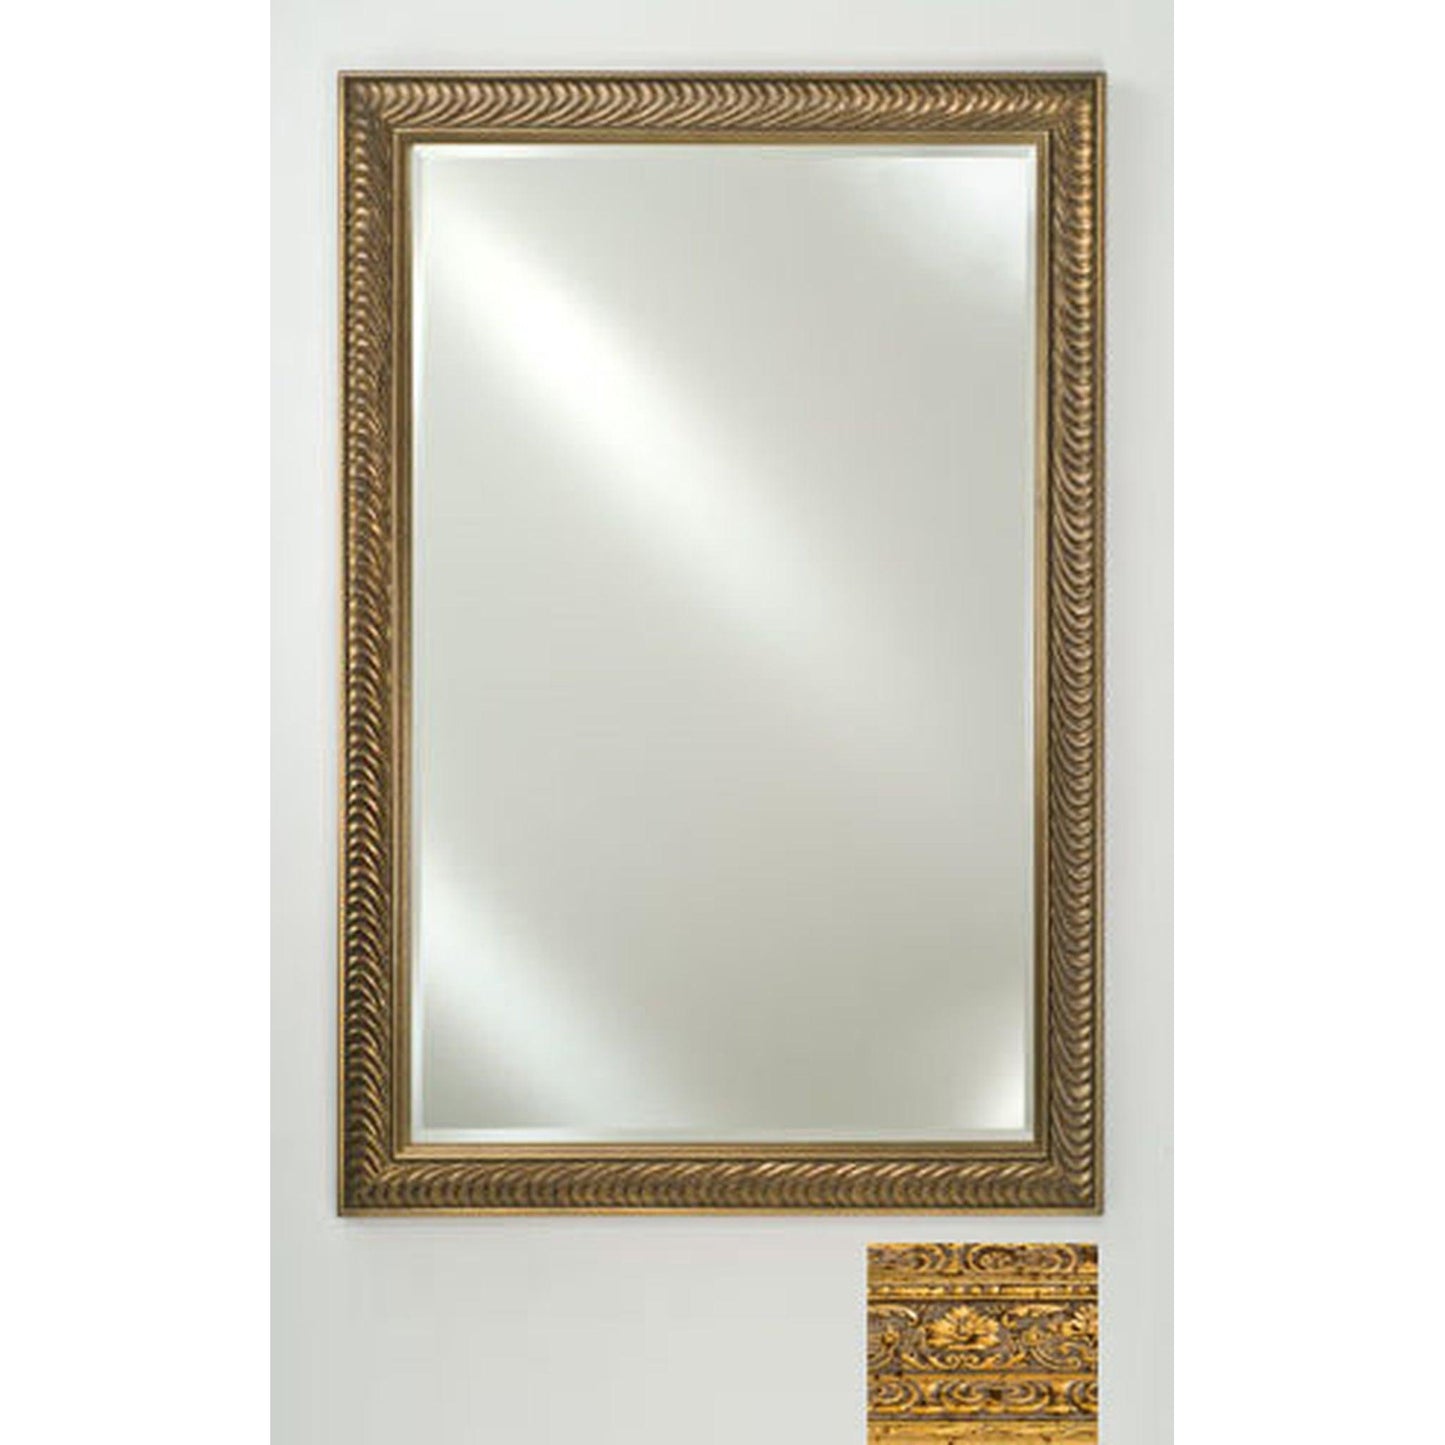 Afina Signature 20" x 26" Regal Antique Gold Framed Mirror With Beveled Edge